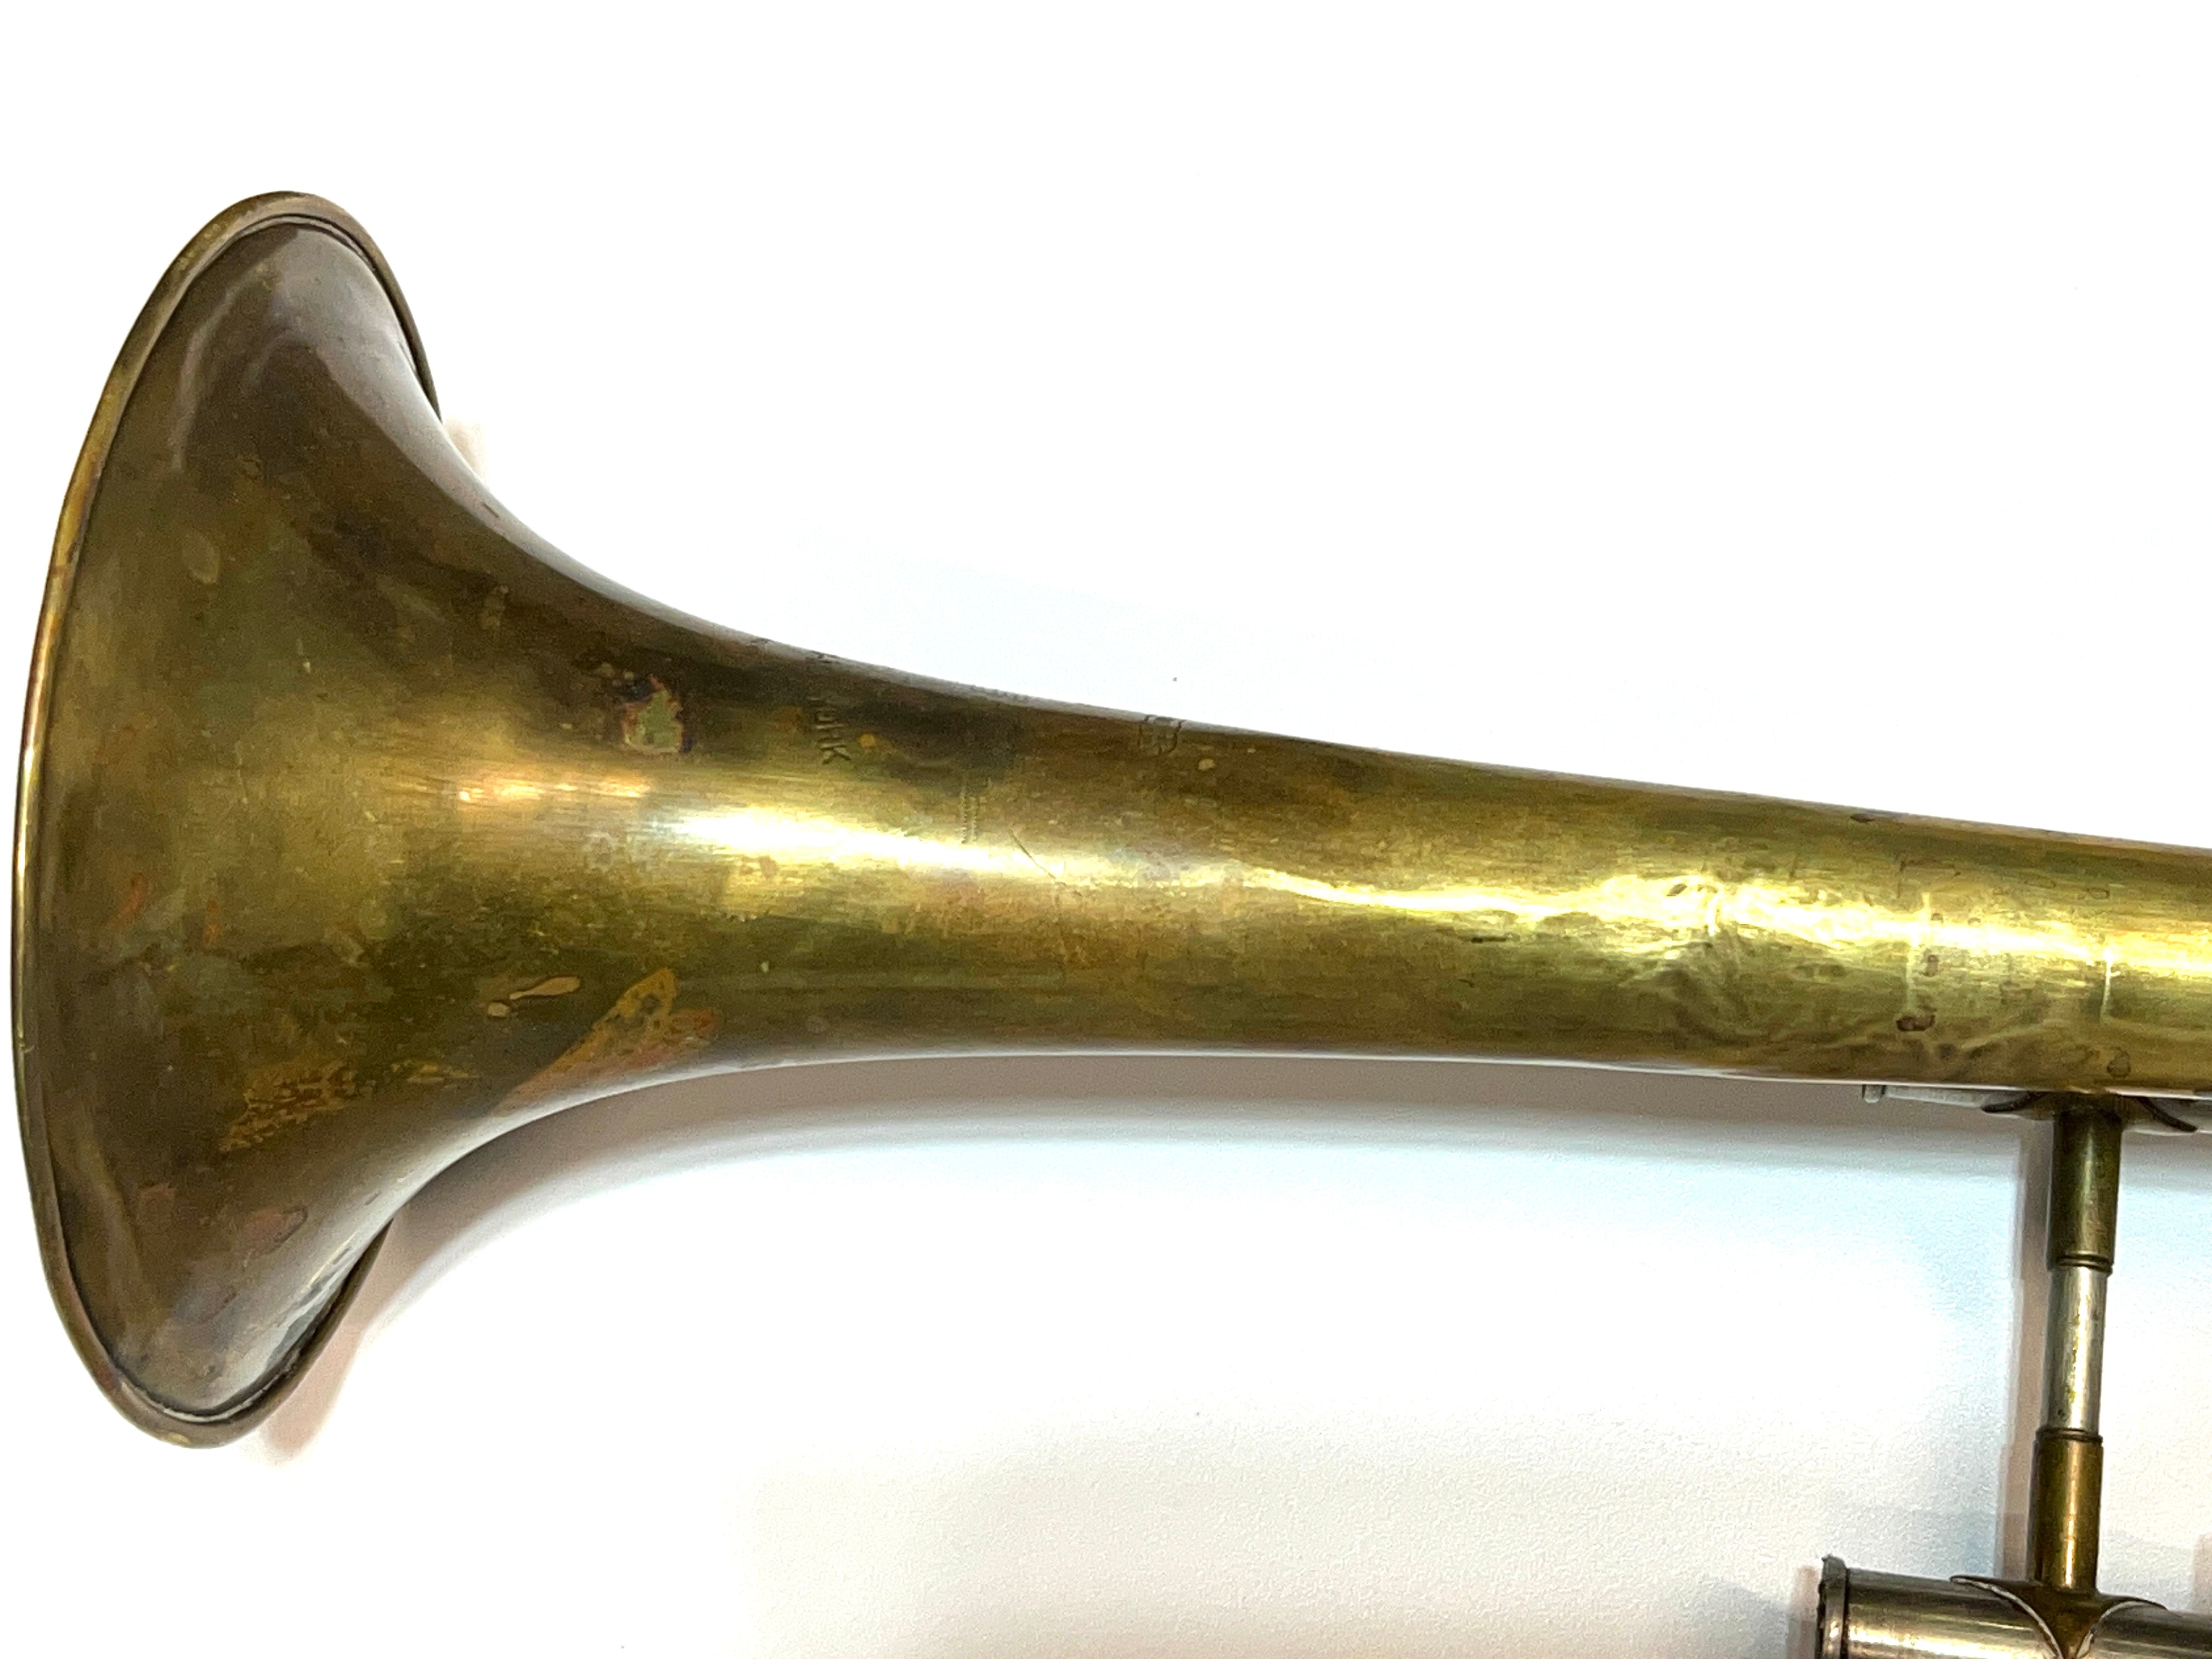 Besson Brevete Trumpet Made in England 50 Medals of Honours  USED